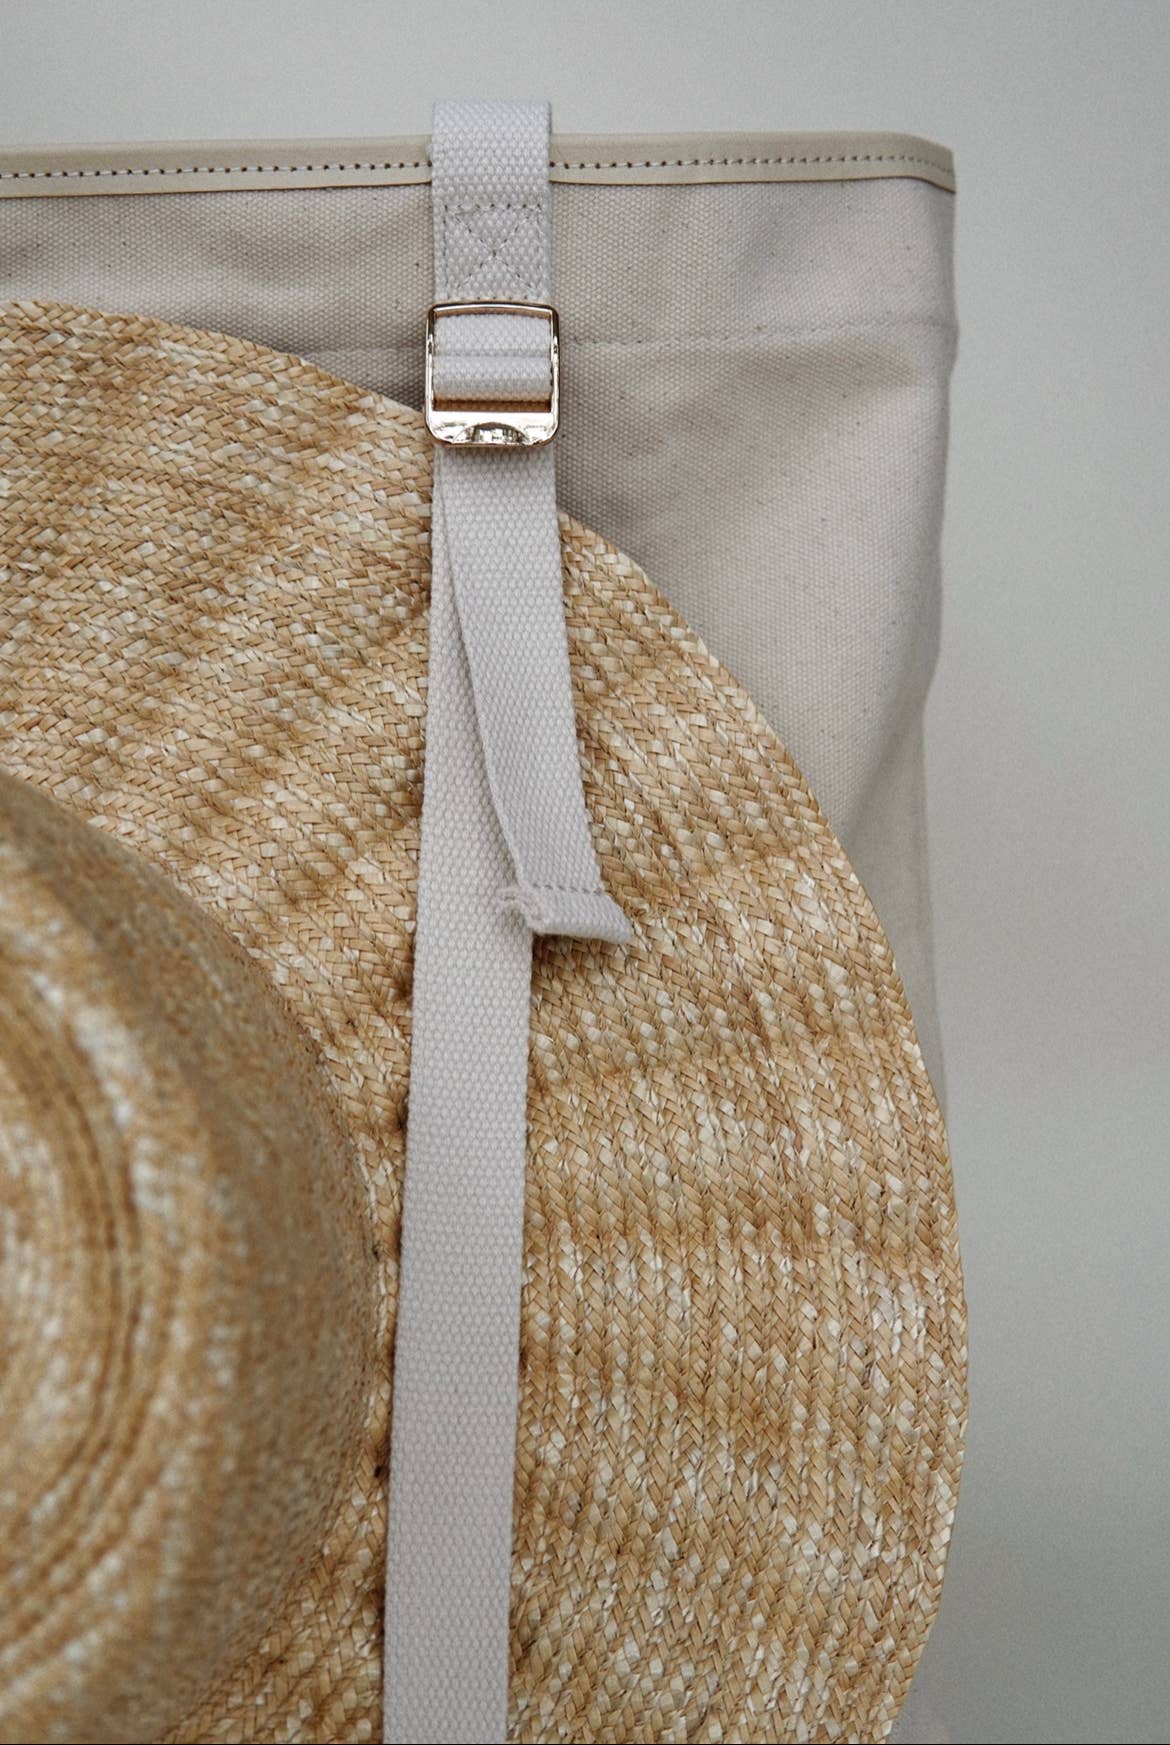 Augustine Hat Co. - On Holiday 2.0 - Hat Travel Tote: Canvas